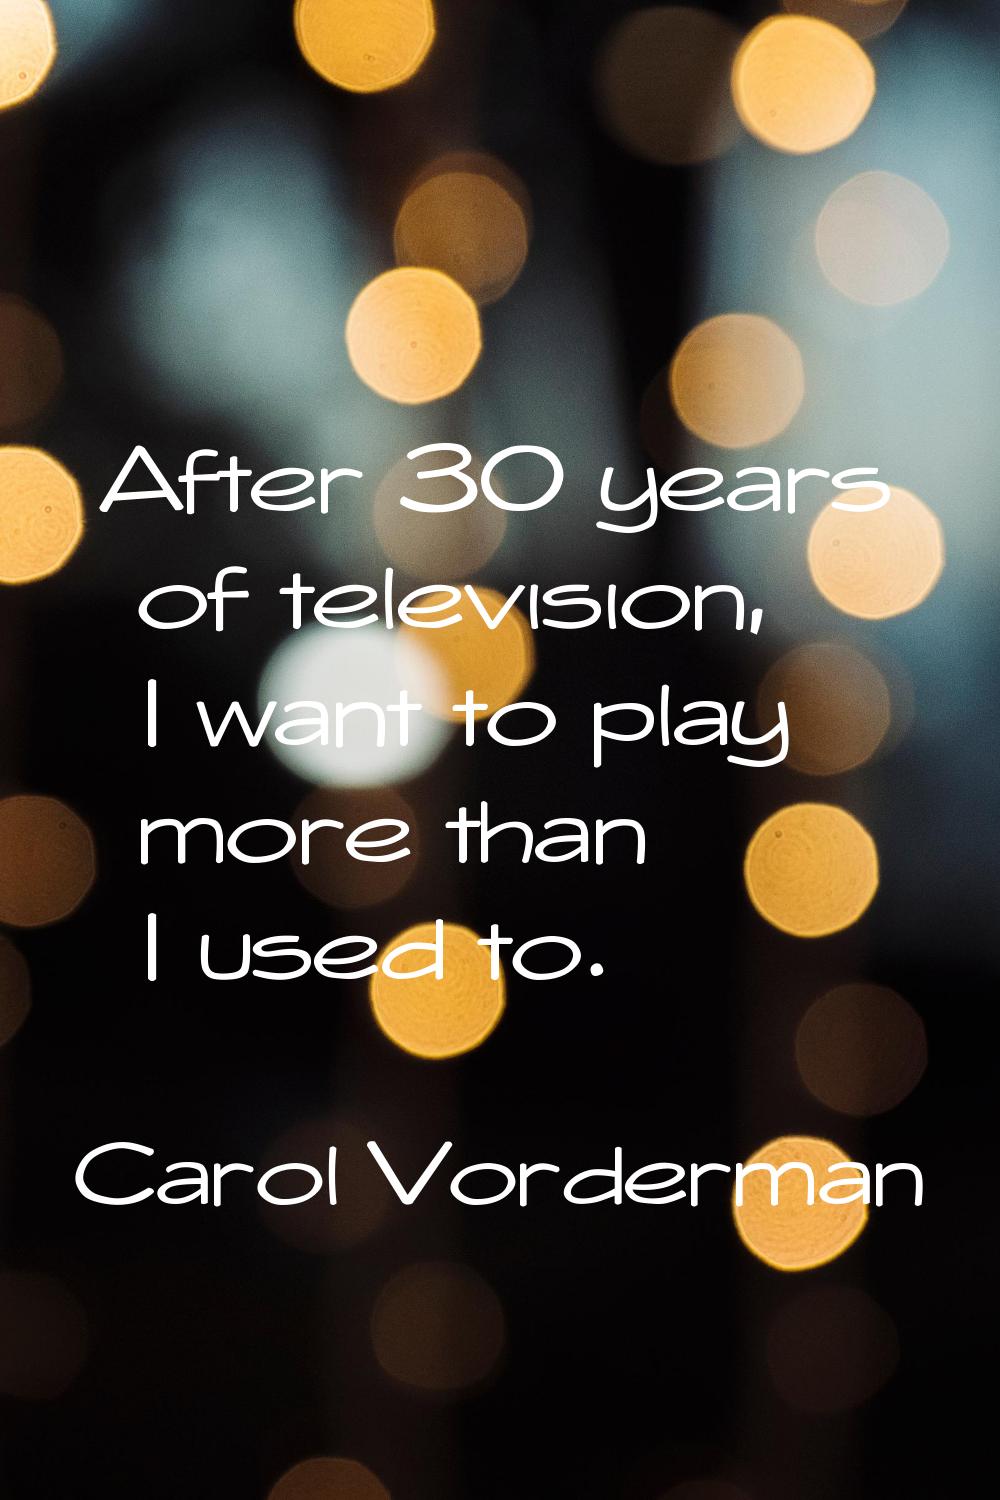 After 30 years of television, I want to play more than I used to.